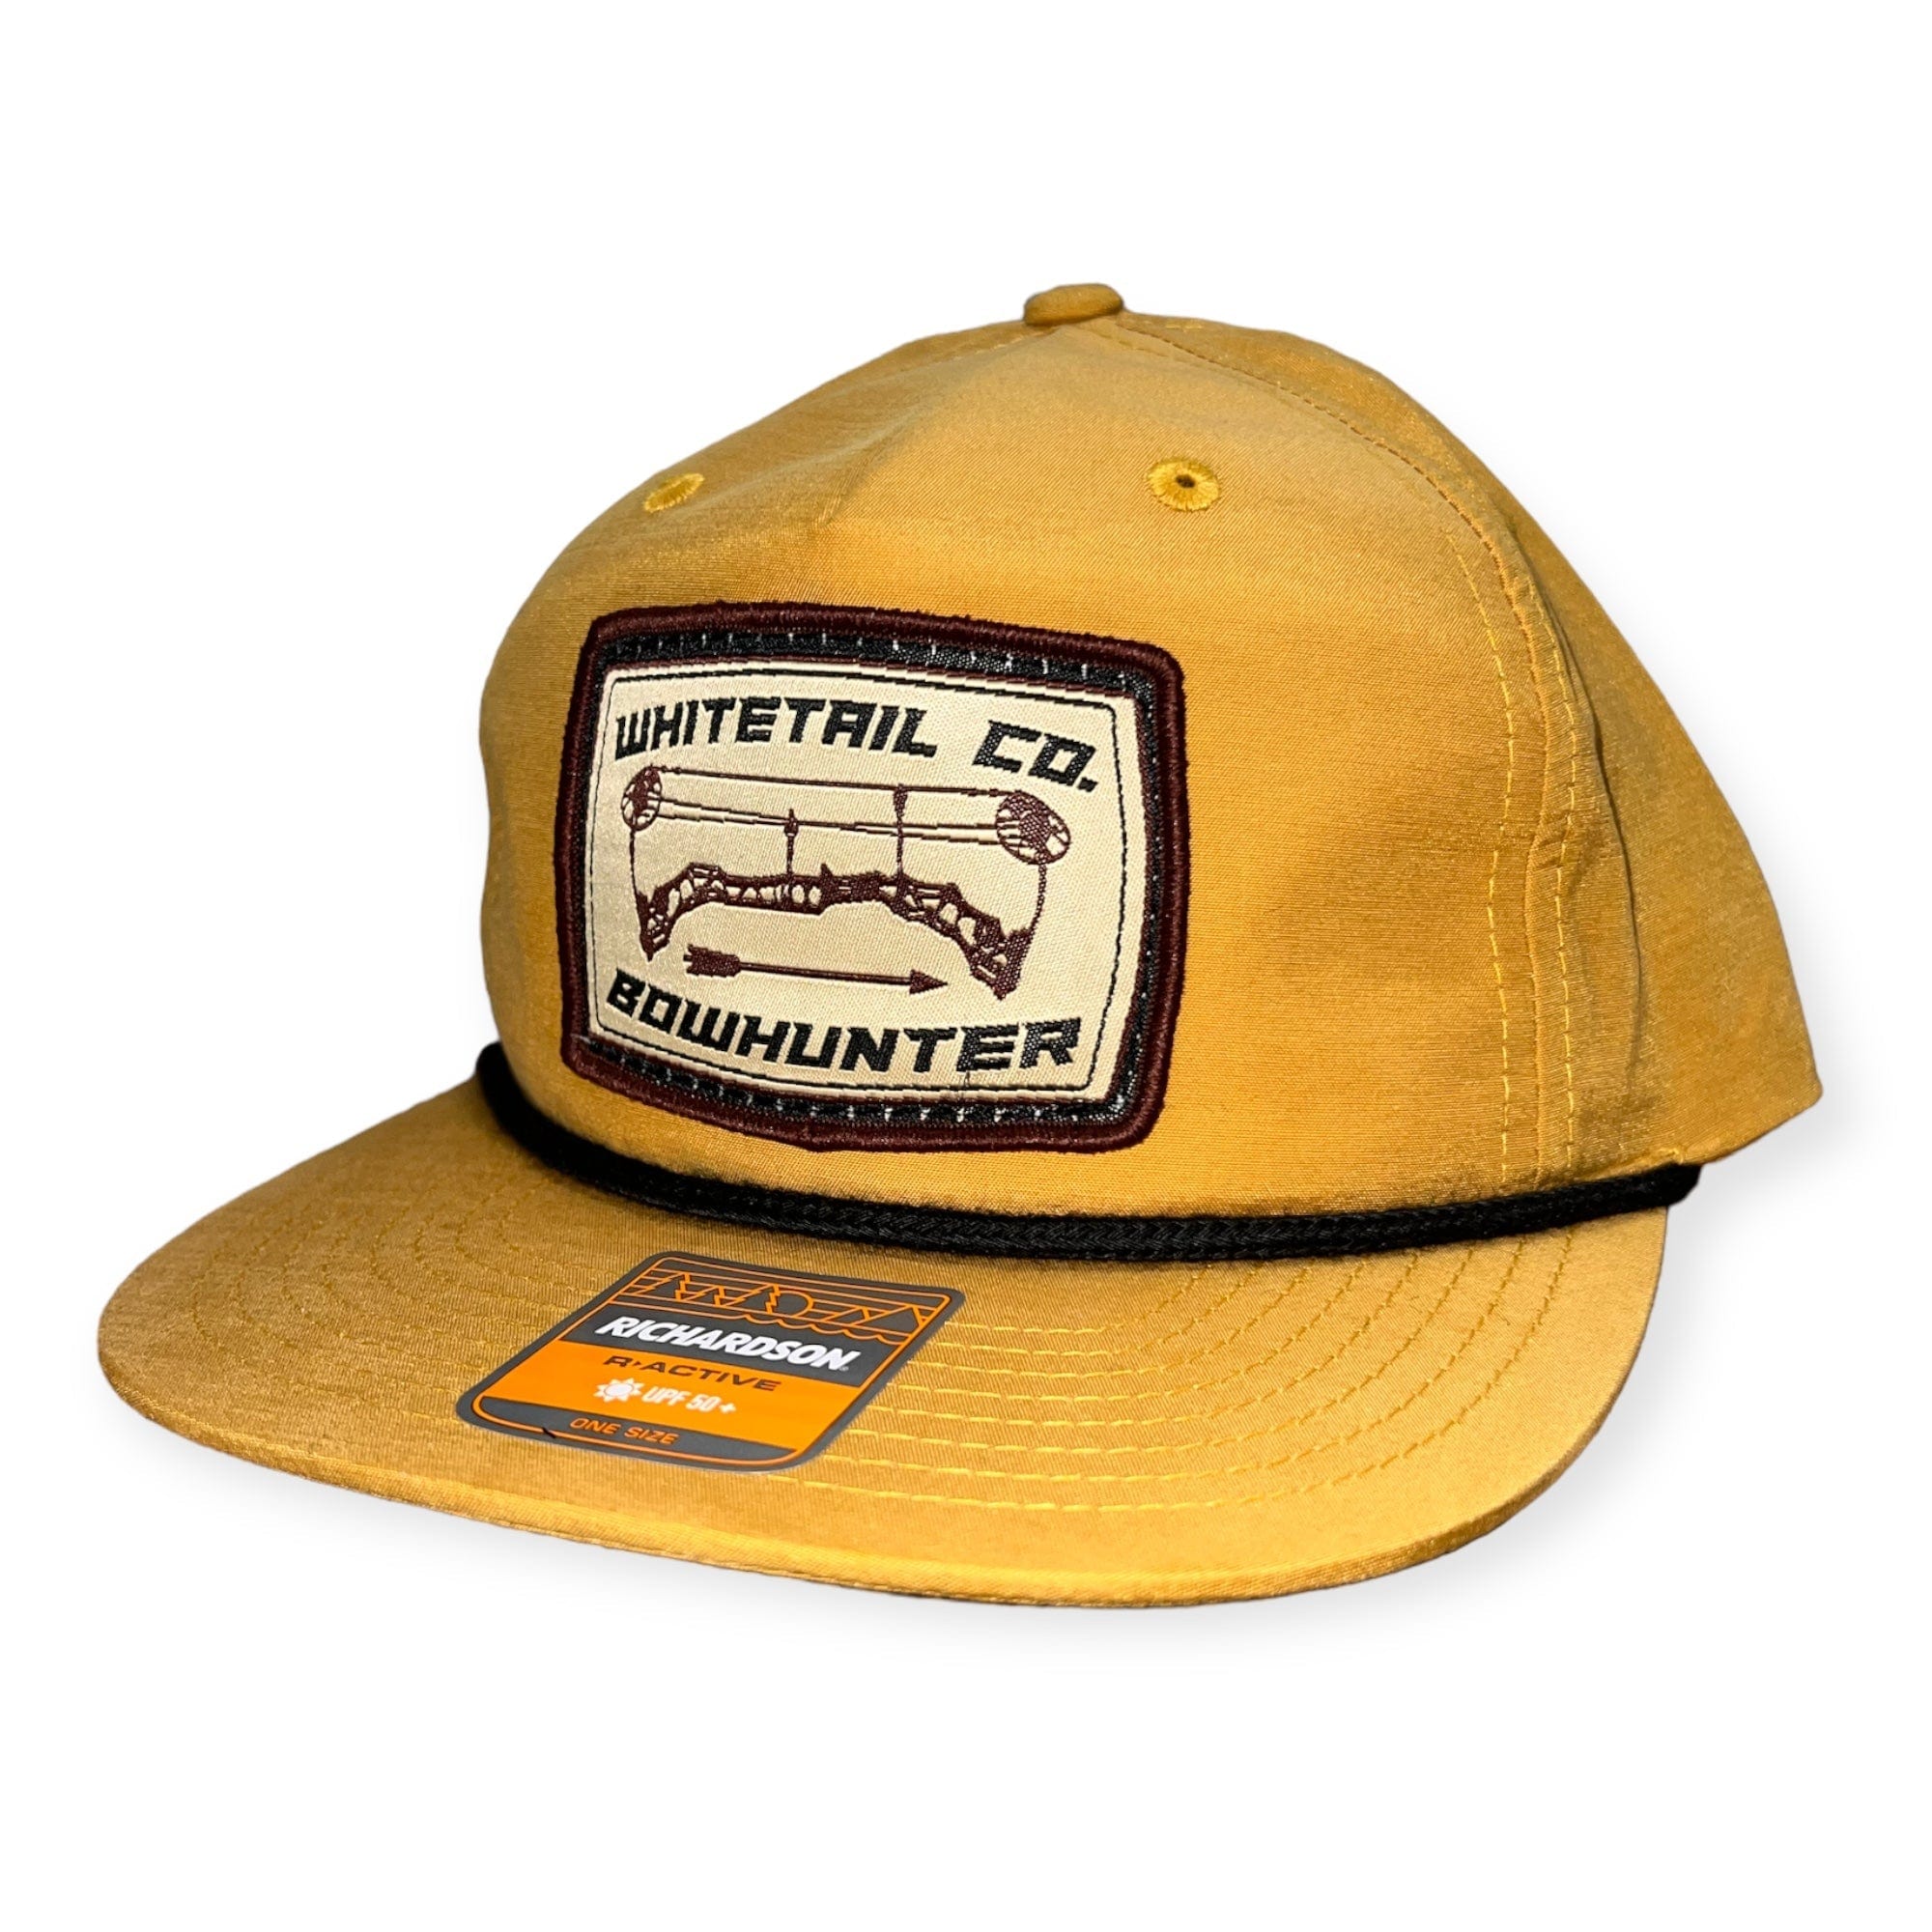 Whitetail Company Hats Whitetail Co. Bowhunter Richardson Ropy Hat Biscuit/Black